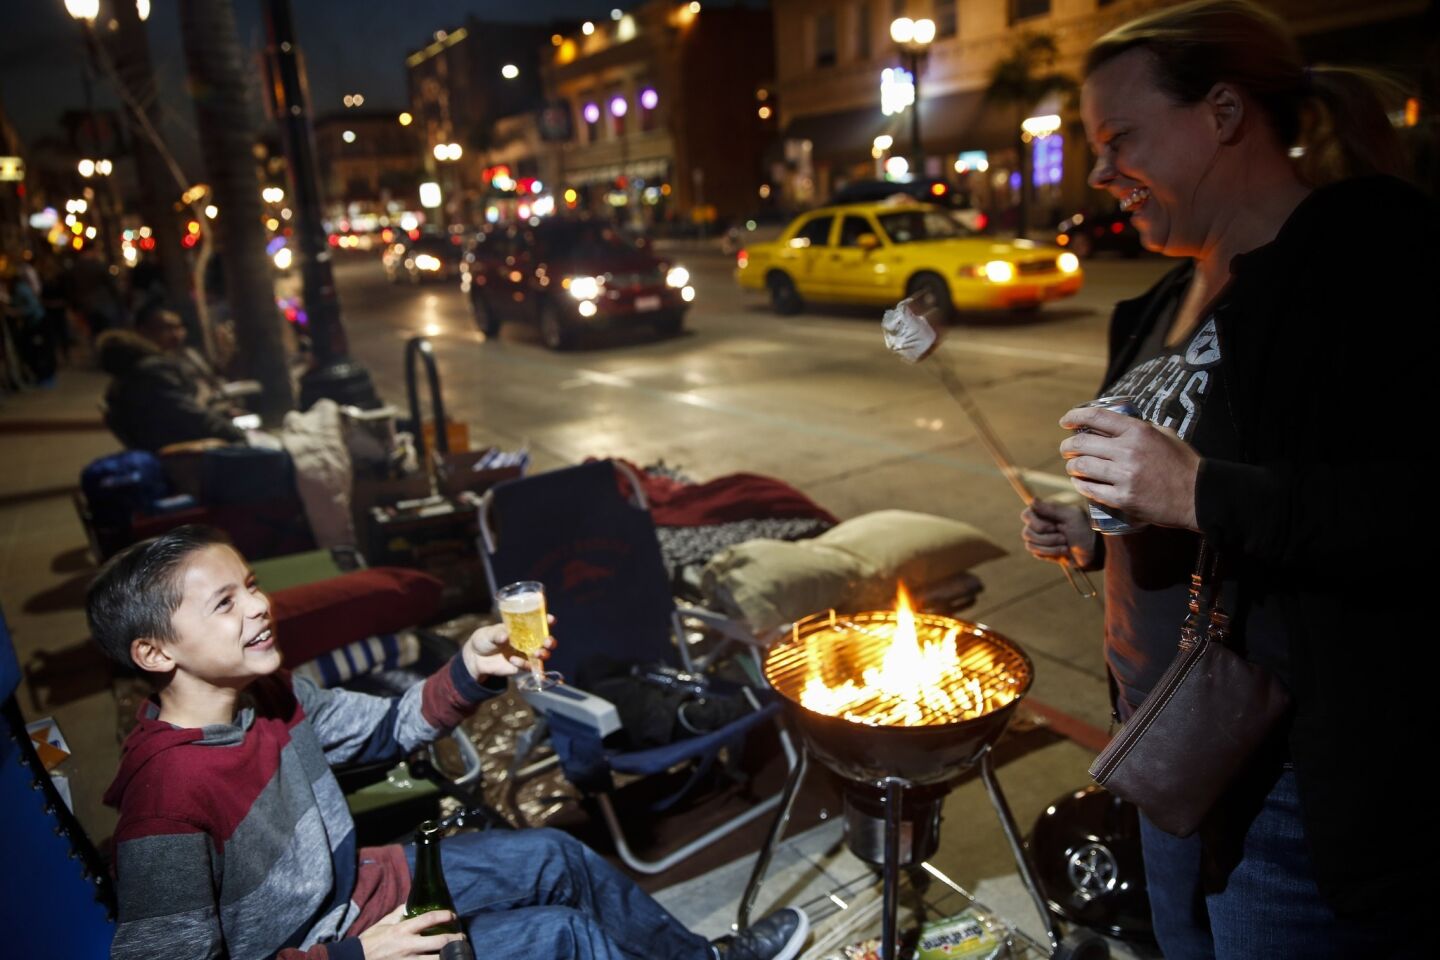 Jarod Gutierrez, 12, of Corona, prepares some sparkling cider while his mother, Susan, roasts marshmallows on Colorado Boulevard while camping out overnight.